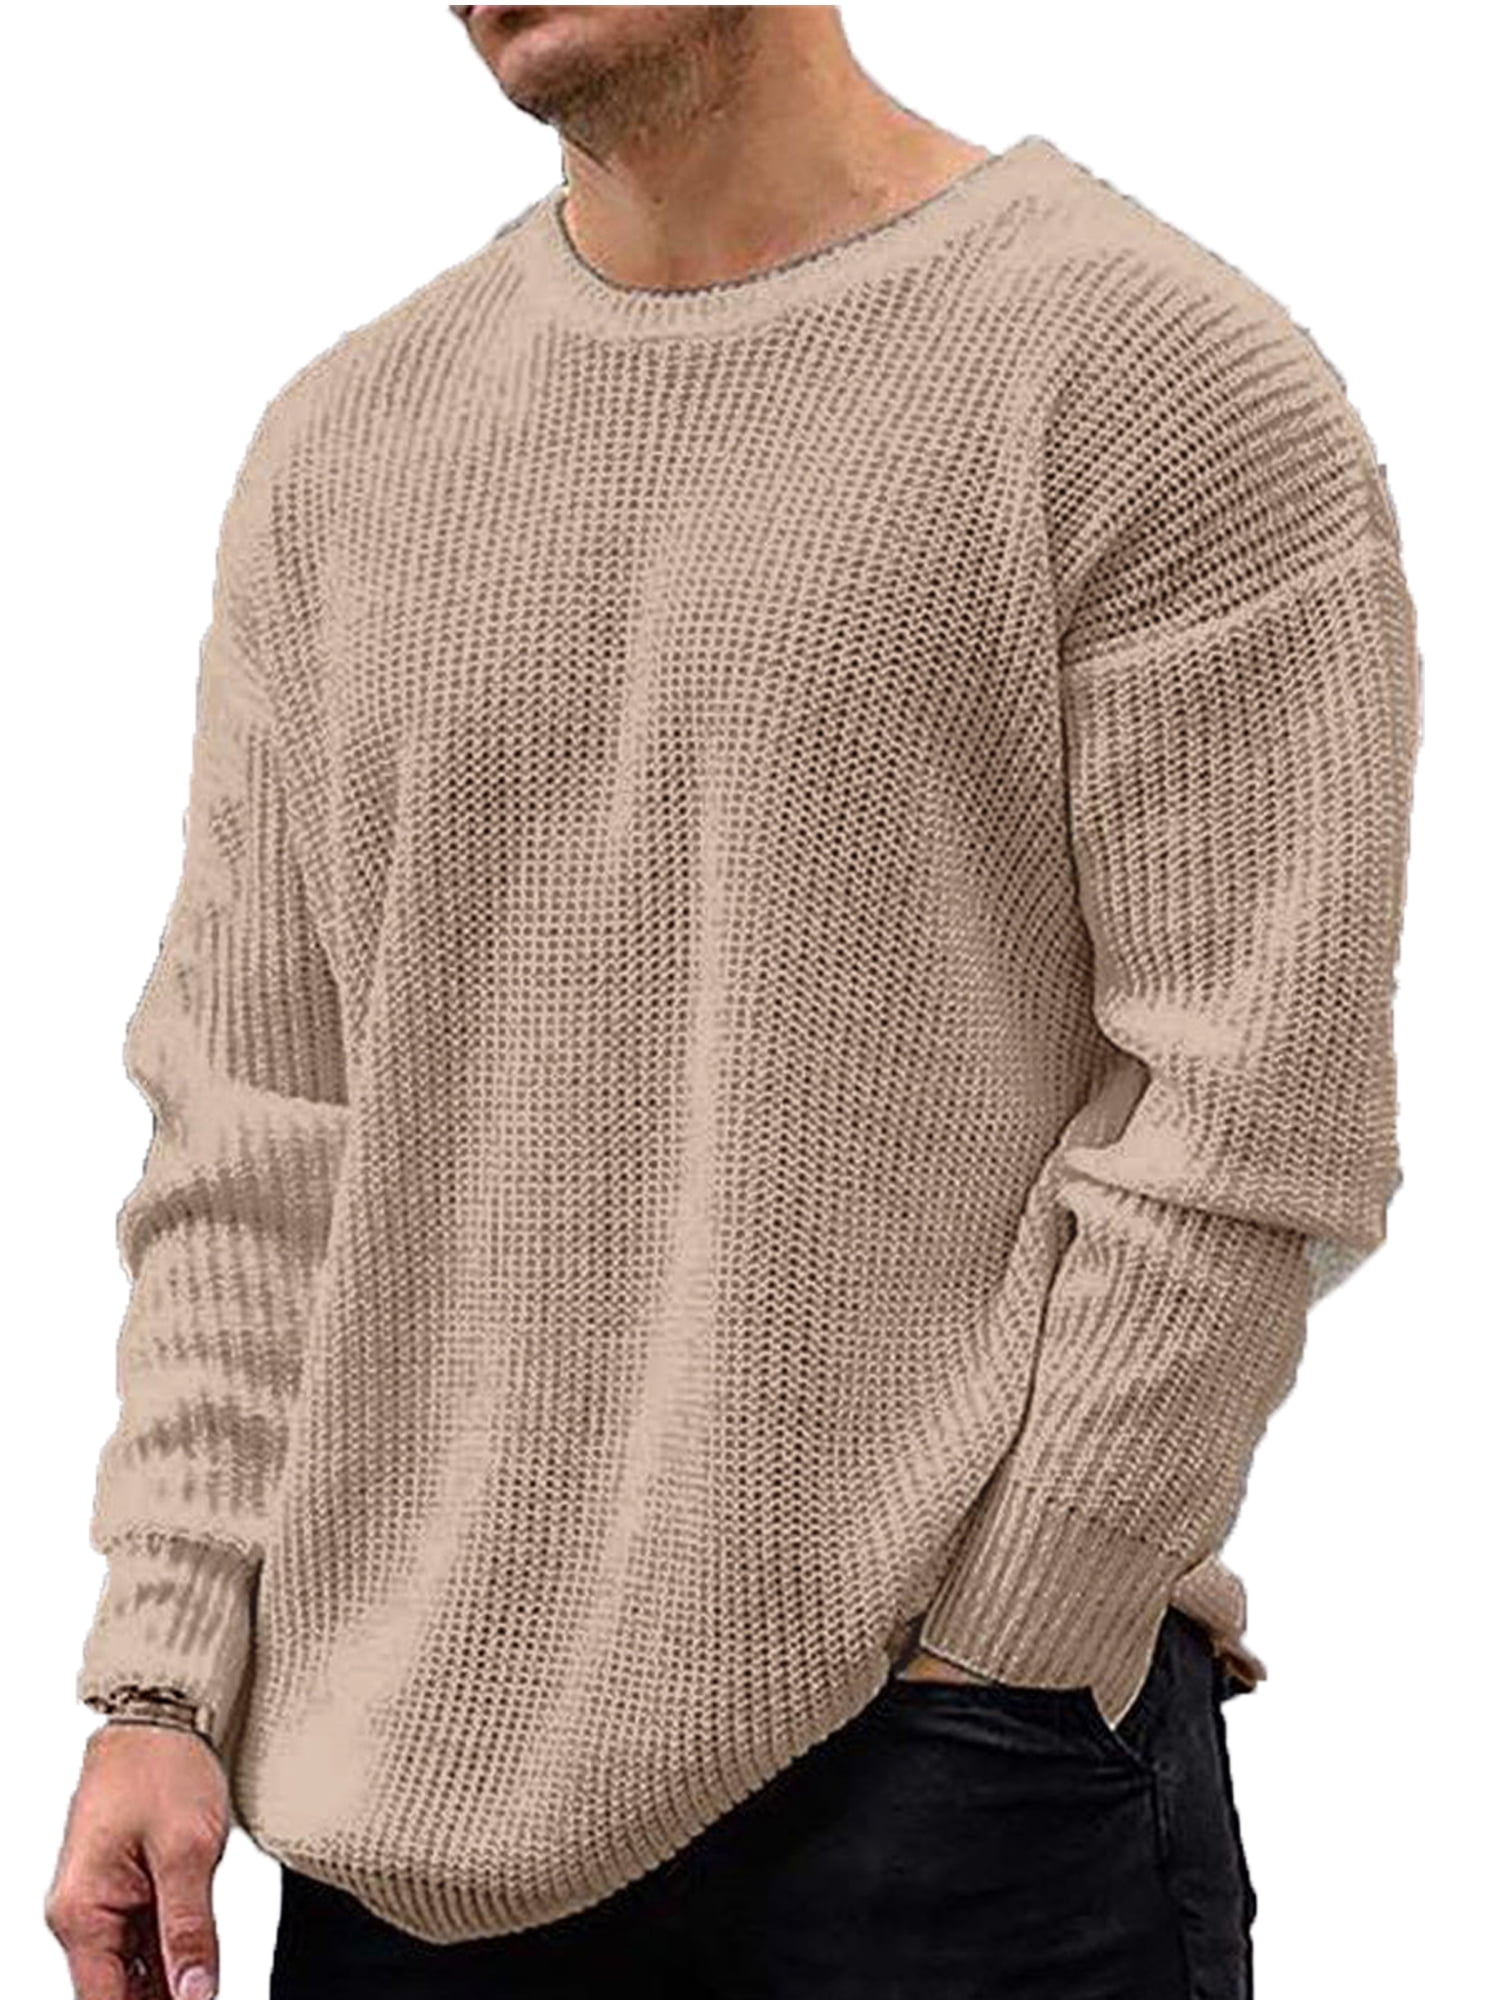 SELX Men Pullover Long Sleeve Round Neck Pattern Print Knit Sweater Top